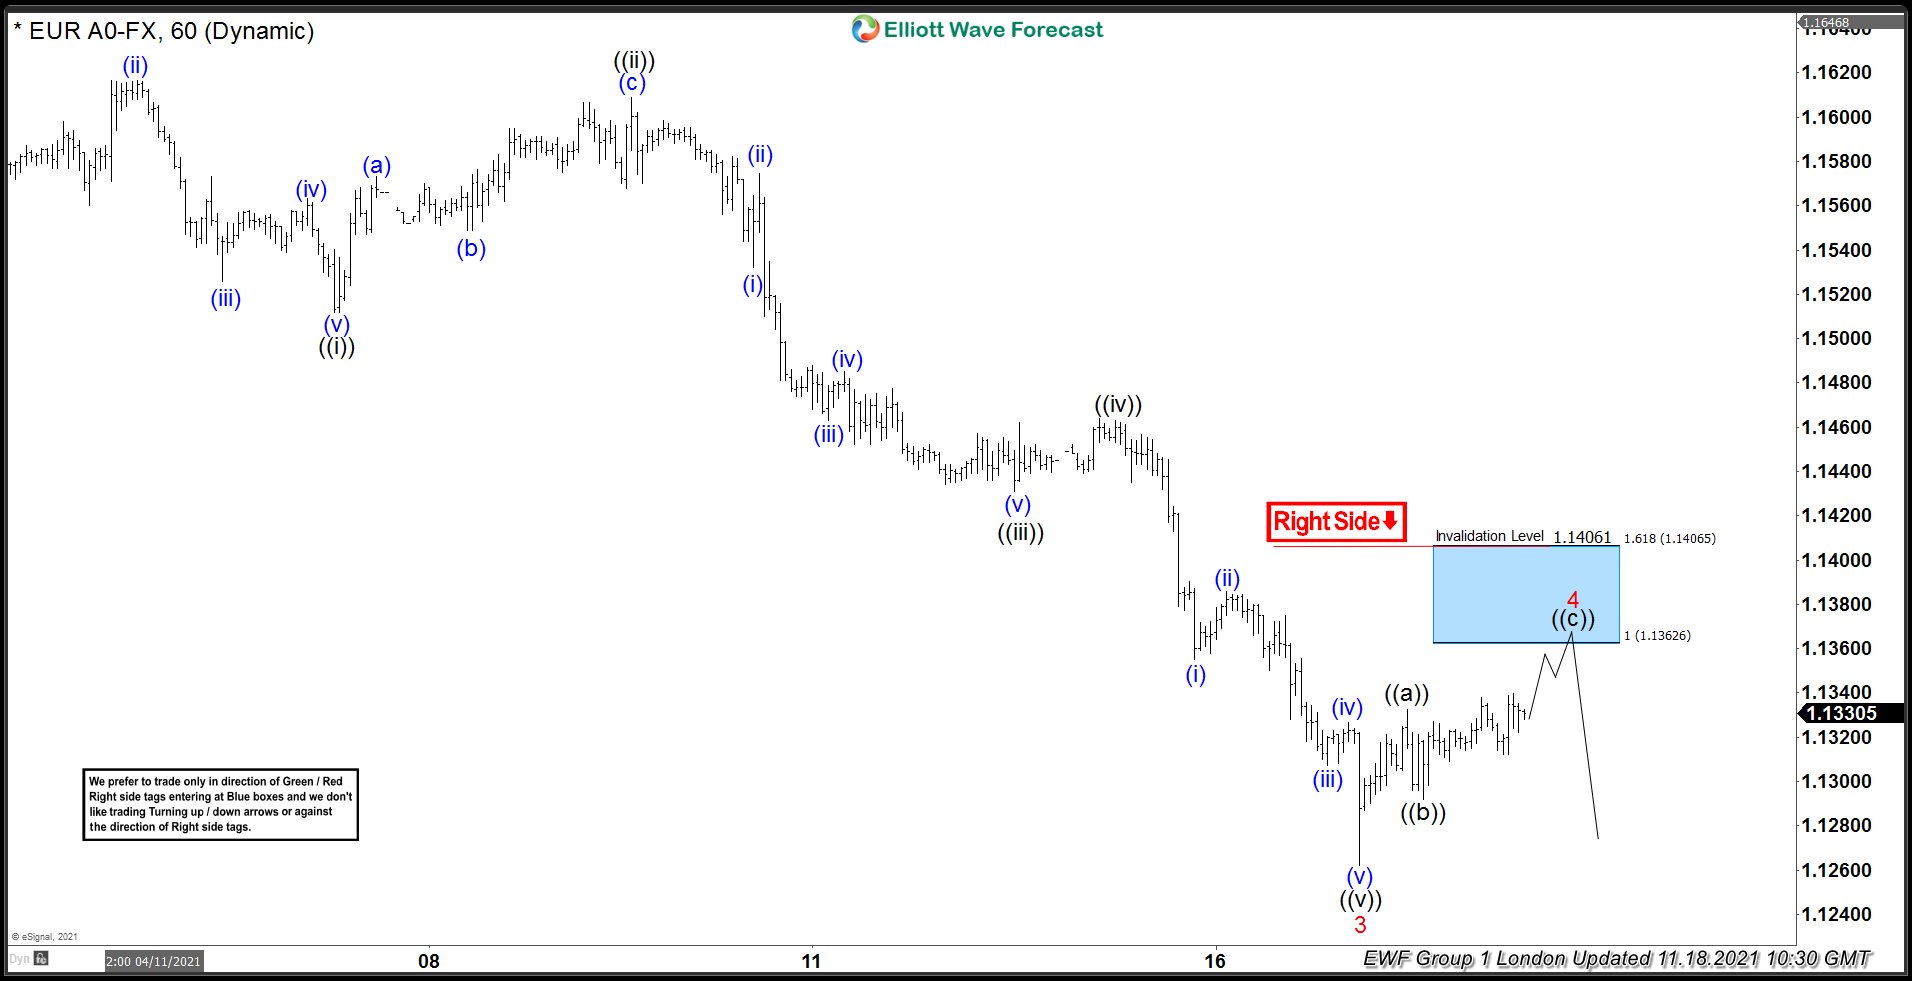 EURUSD Elliott Wave: Calling The Decline & Selling The Rallies At The Blue Box